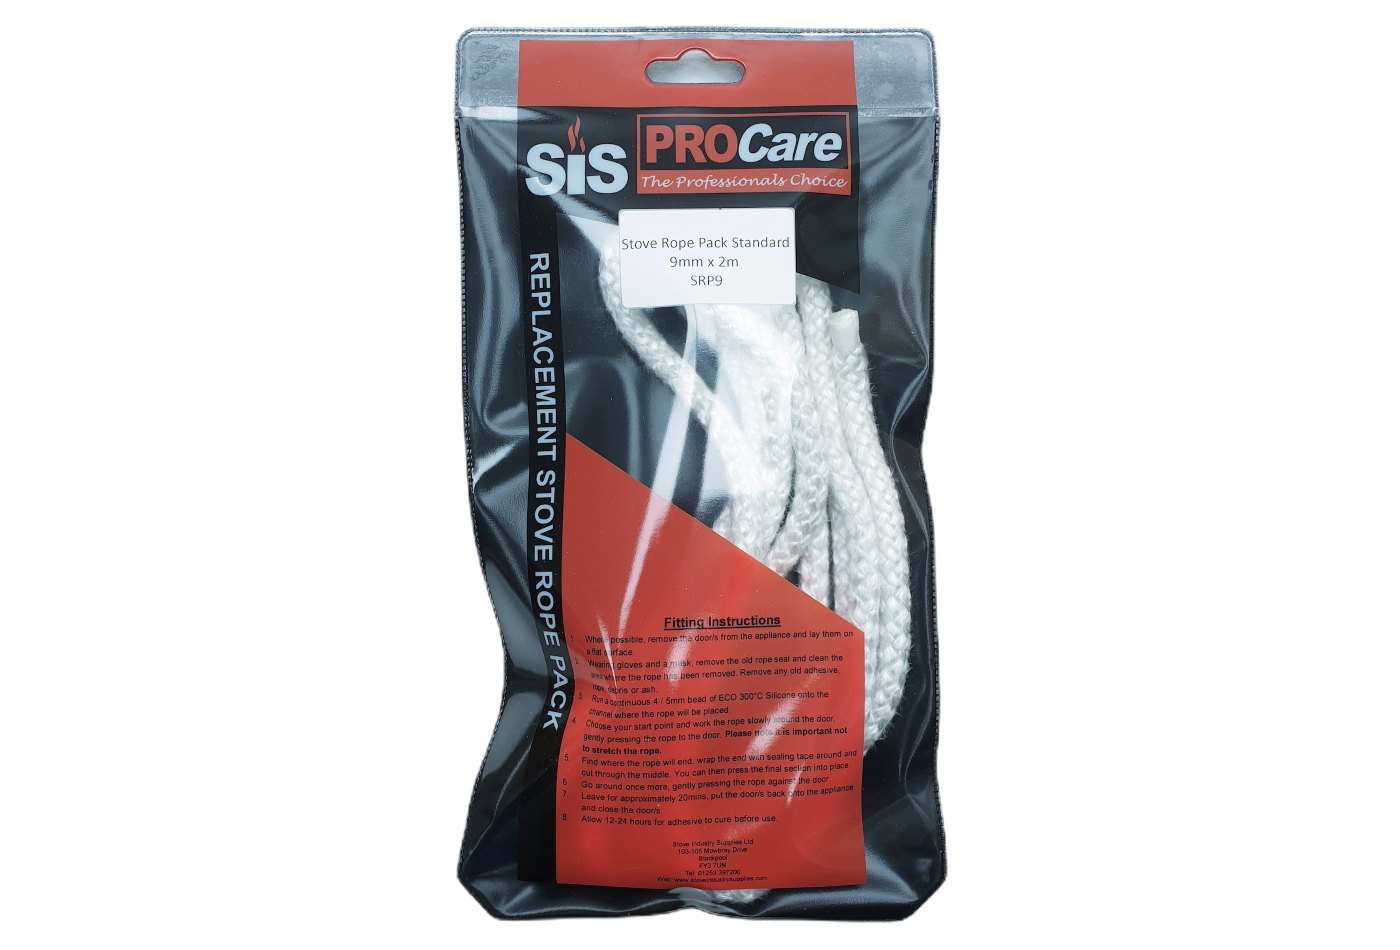 SiS Procare White 9 milimetre x 2 metre Standard Stove Rope Pack - product code SRP9